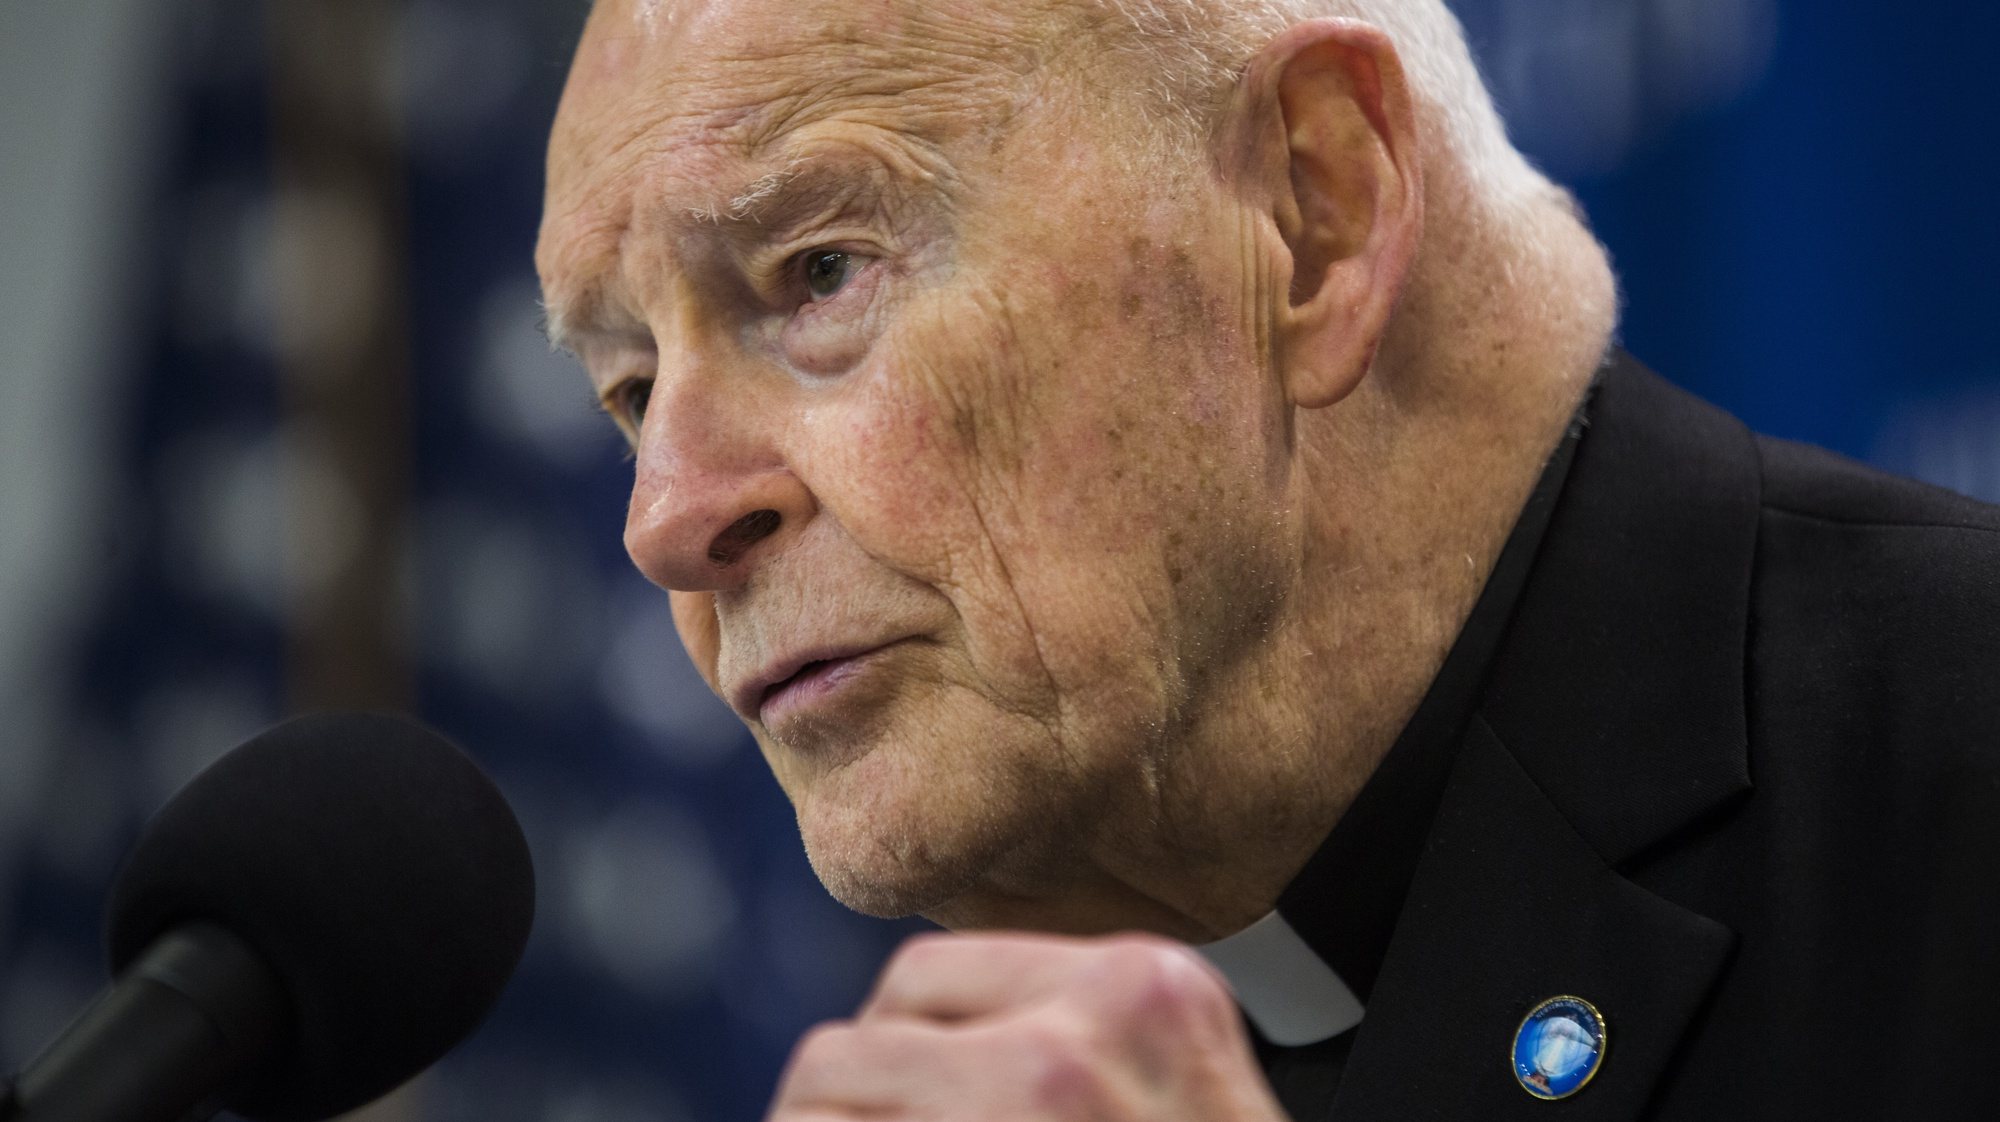 epa07374072 (FILE) - Cardinal Theodore McCarrick speaks at a news conference on &#039;protecting religious minorities in predominantly Islamic countries&#039;, at the National Press Club in Washington, DC, USA, 10 May 2016, (reissued 16 February 2019). Media reports 16 February 2019 state that Pope Francis has expelled Theodore McCarrick, a former cardinal and archbishop of Washington, from the priesthood. The first time that a cardinal or bishop in the United States has been defrocked. US Church officials said allegations he had sexually assaulted a teenager five decades ago were credible.  EPA/JIM LO SCALZO *** Local Caption *** 52746854